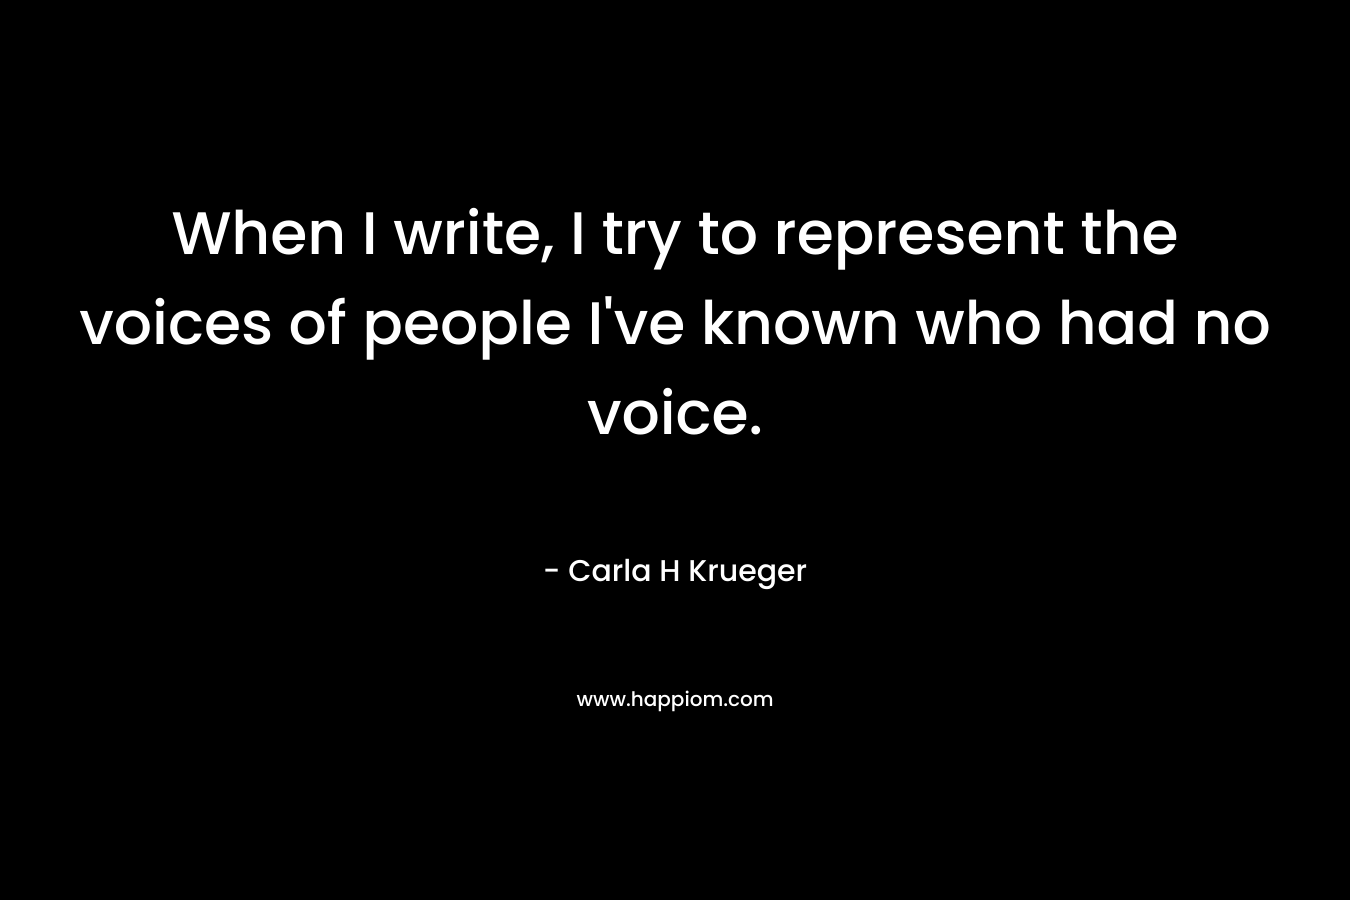 When I write, I try to represent the voices of people I've known who had no voice.